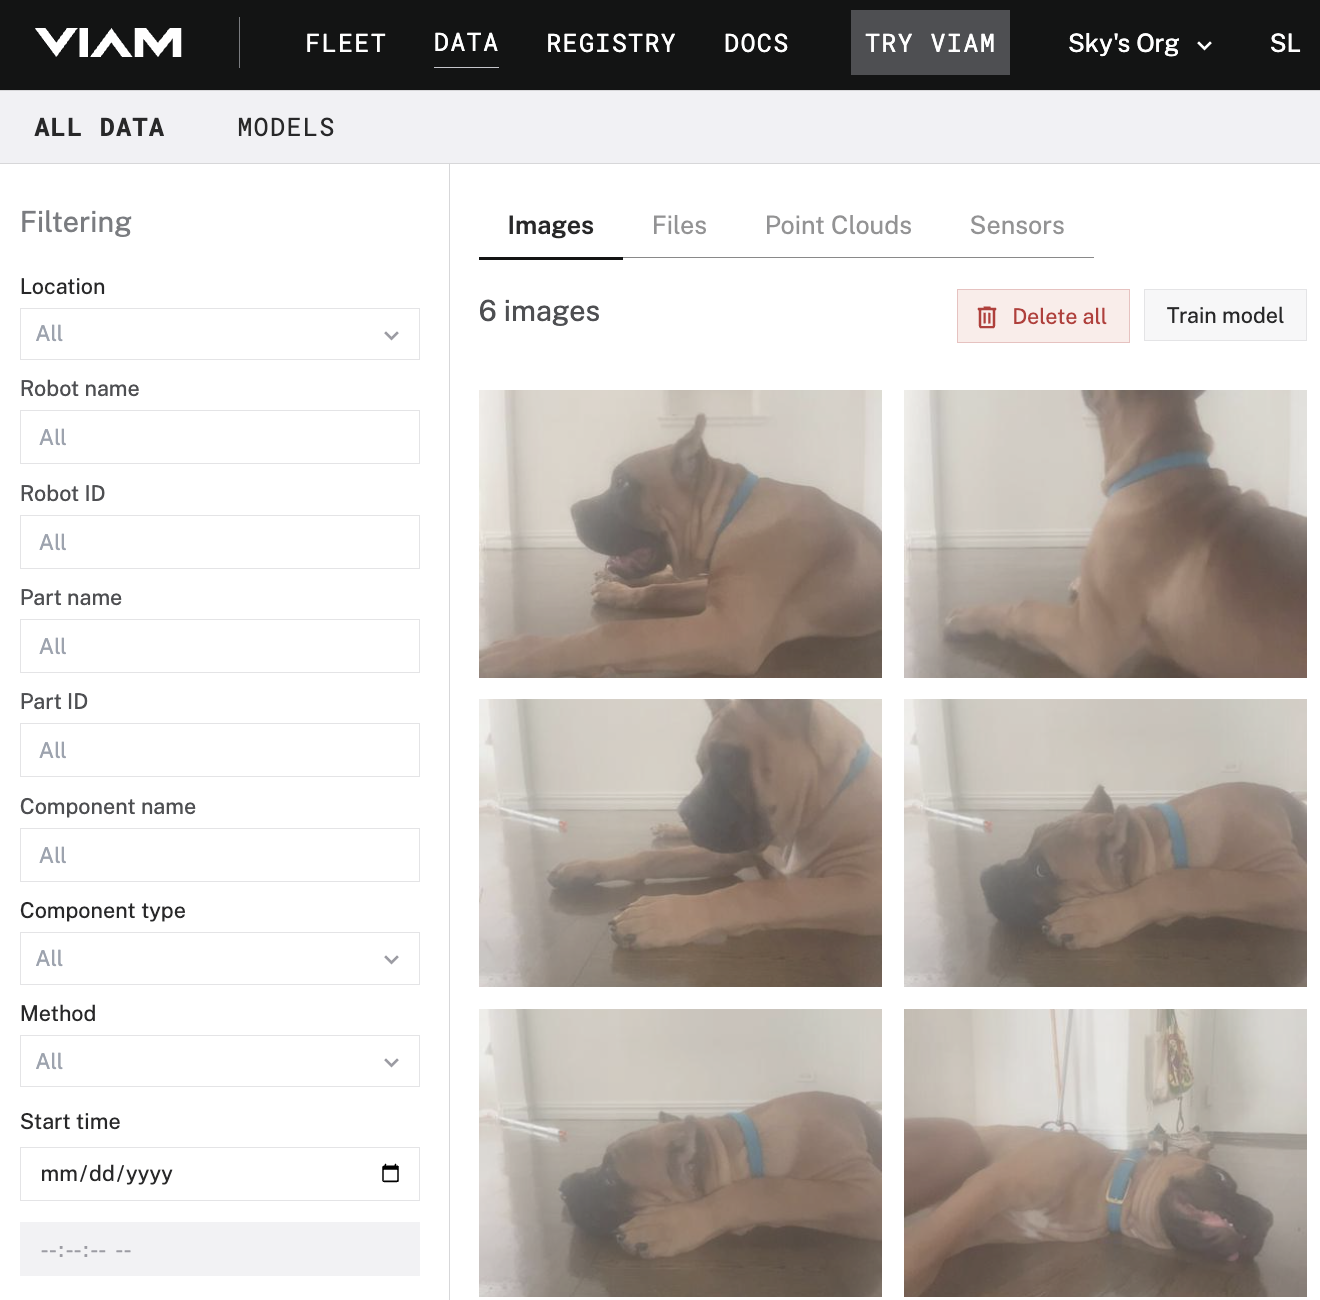 Filtered data from the custom colorfiltercam in the DATA tab showing only photos of a dog wearing a blue collar